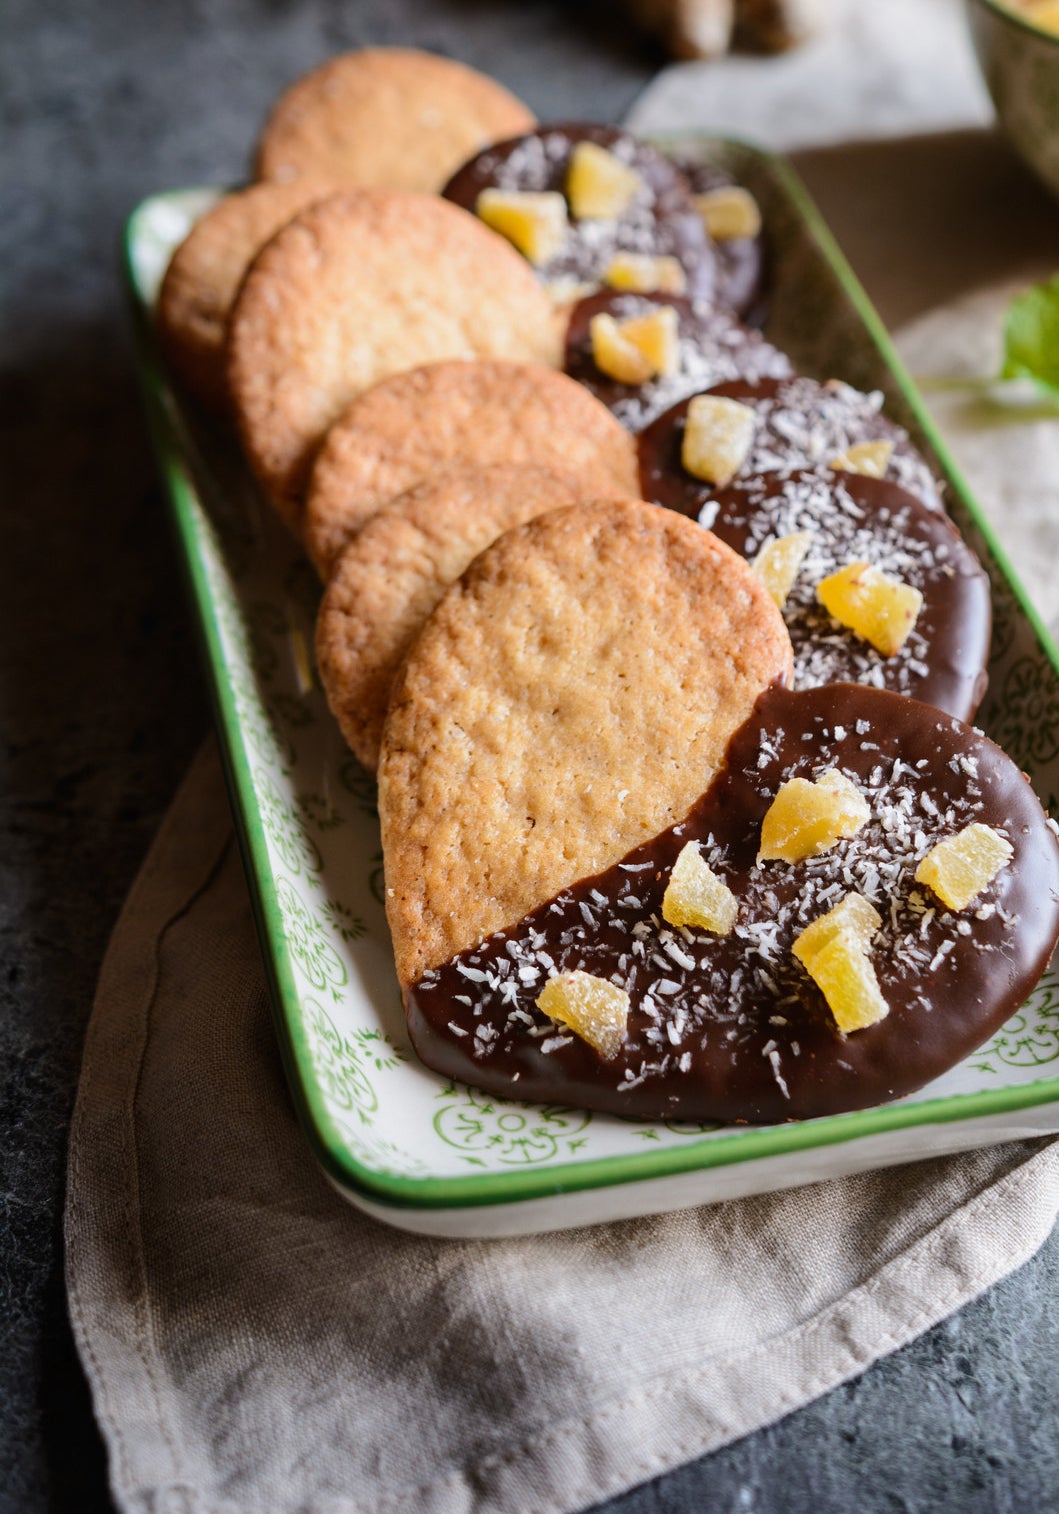 Biscuits decorated with chocolate and pieces of candied ginger.